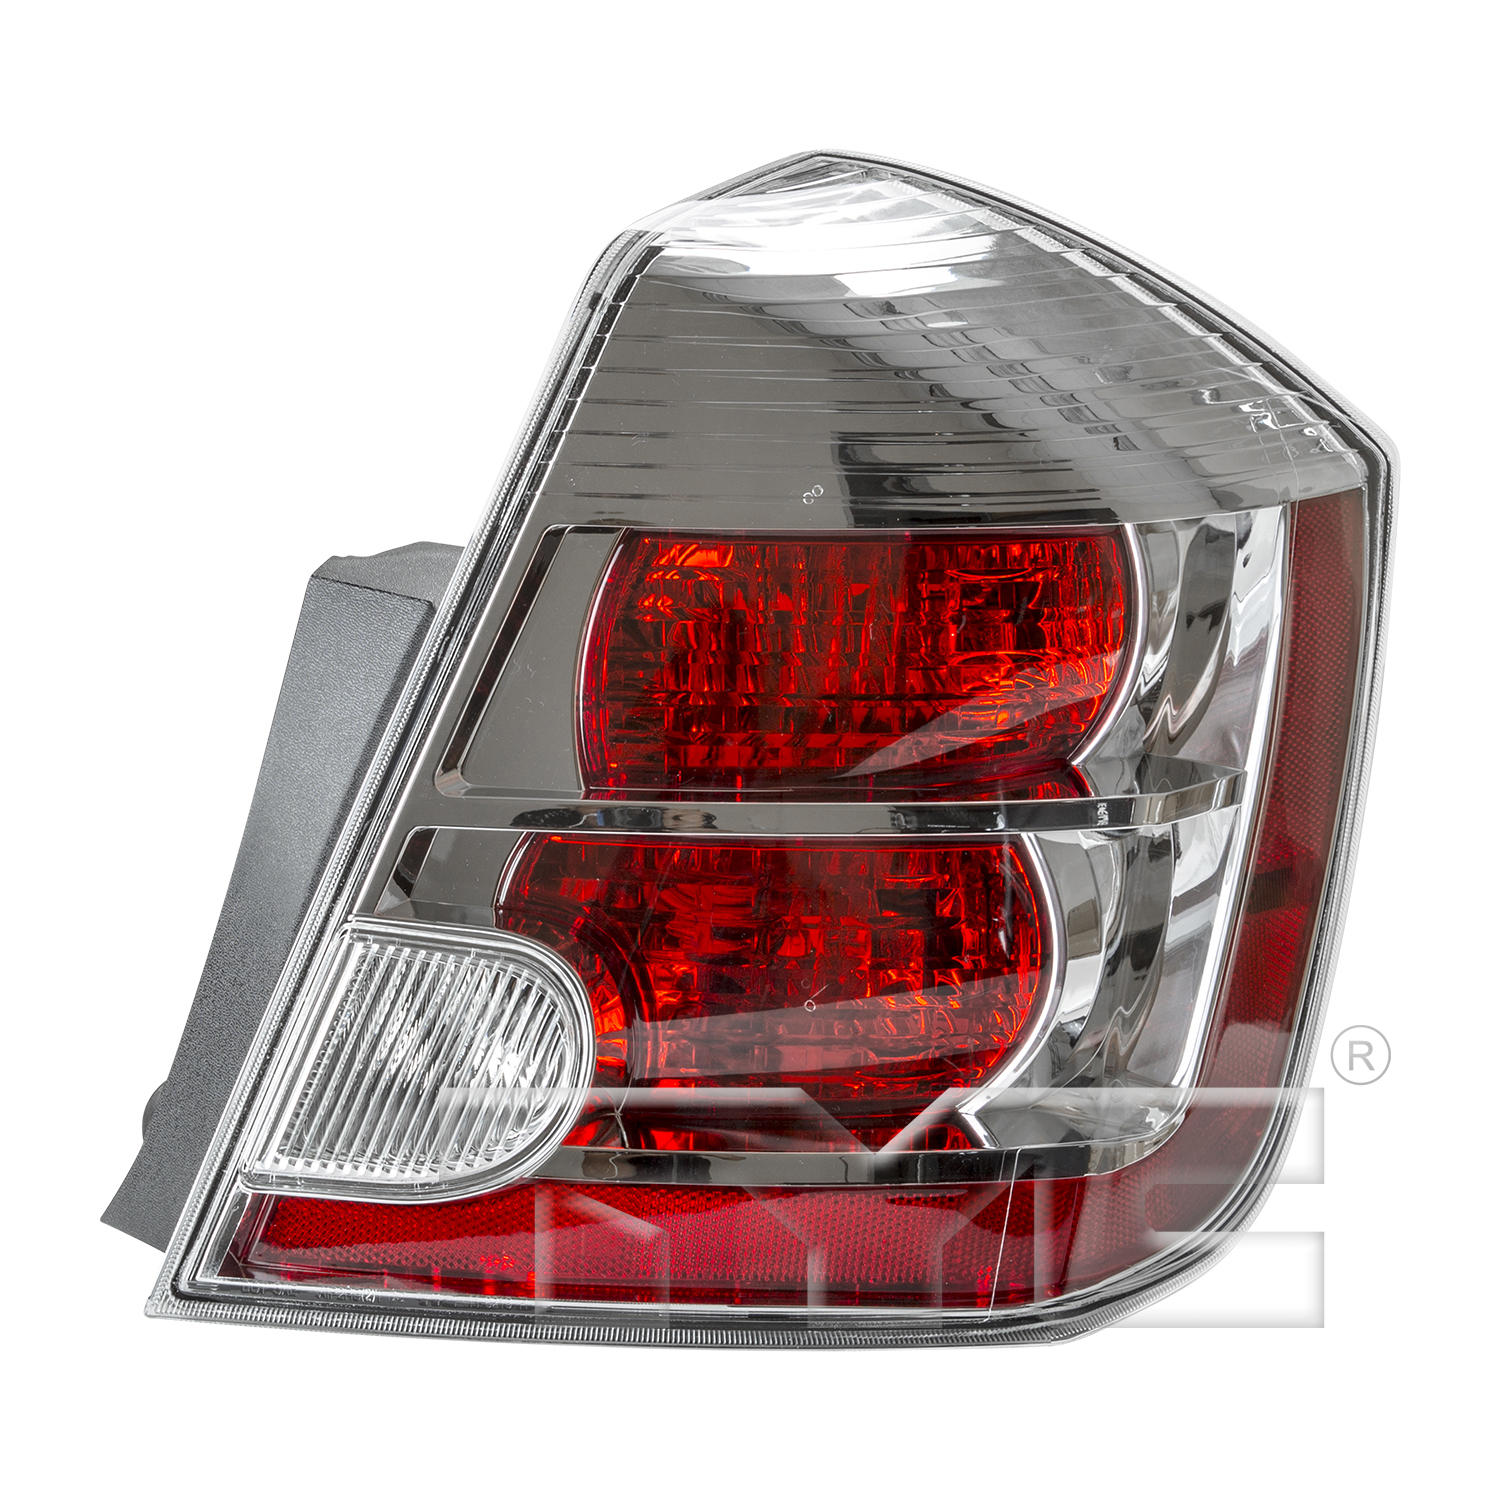 Aftermarket TAILLIGHTS for NISSAN - SENTRA, SENTRA,07-09,RT Taillamp lens/housing